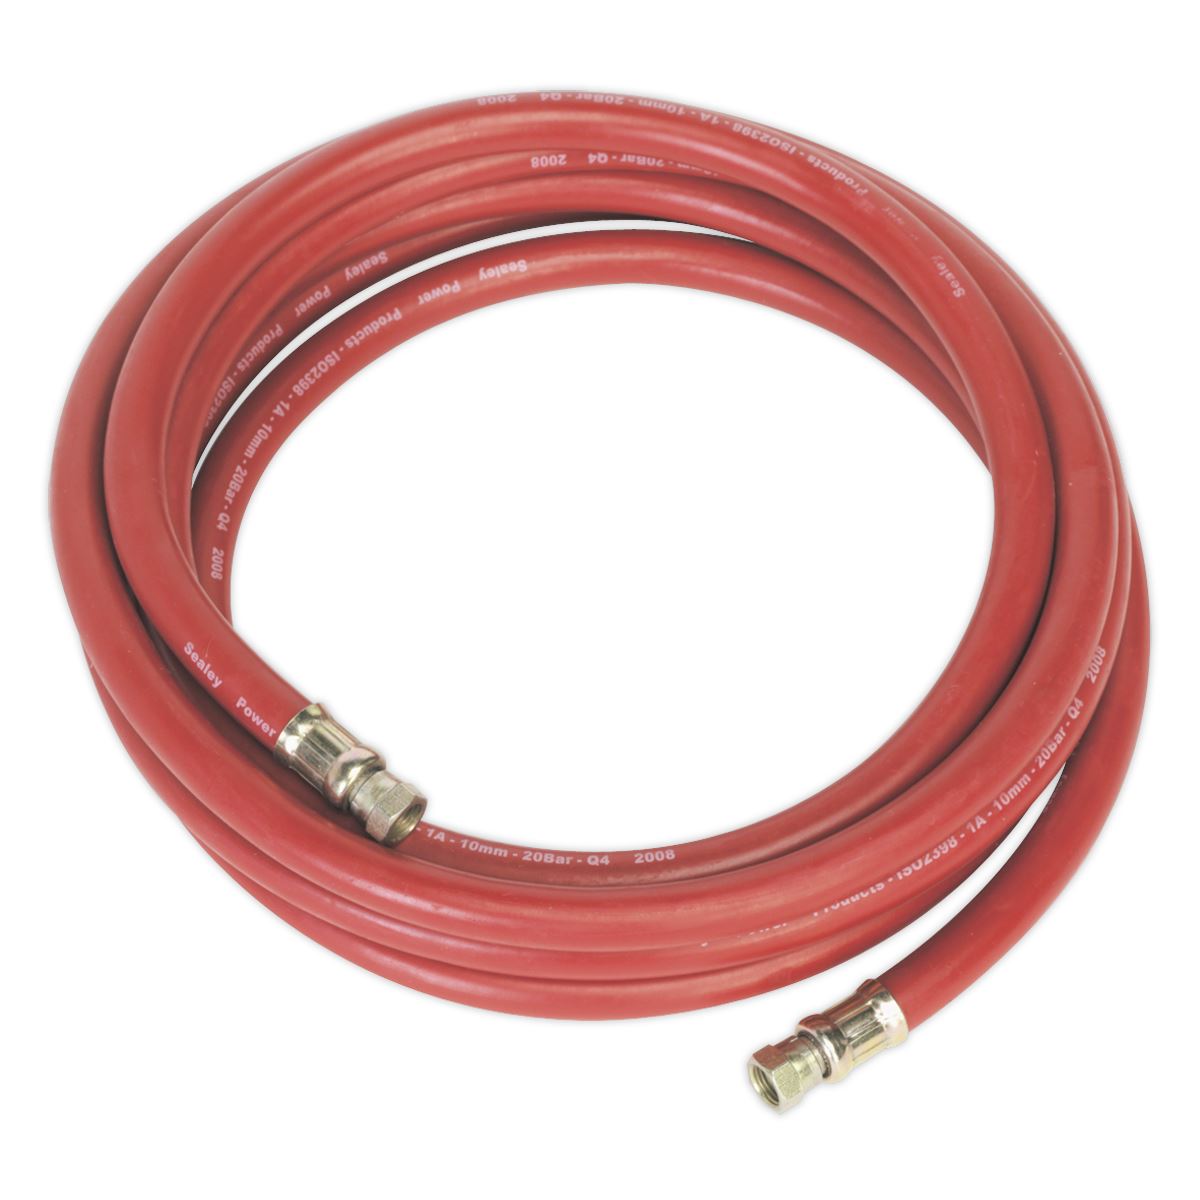 Sealey Air Hose 5m x Ø10mm with 1/4"BSP Unions